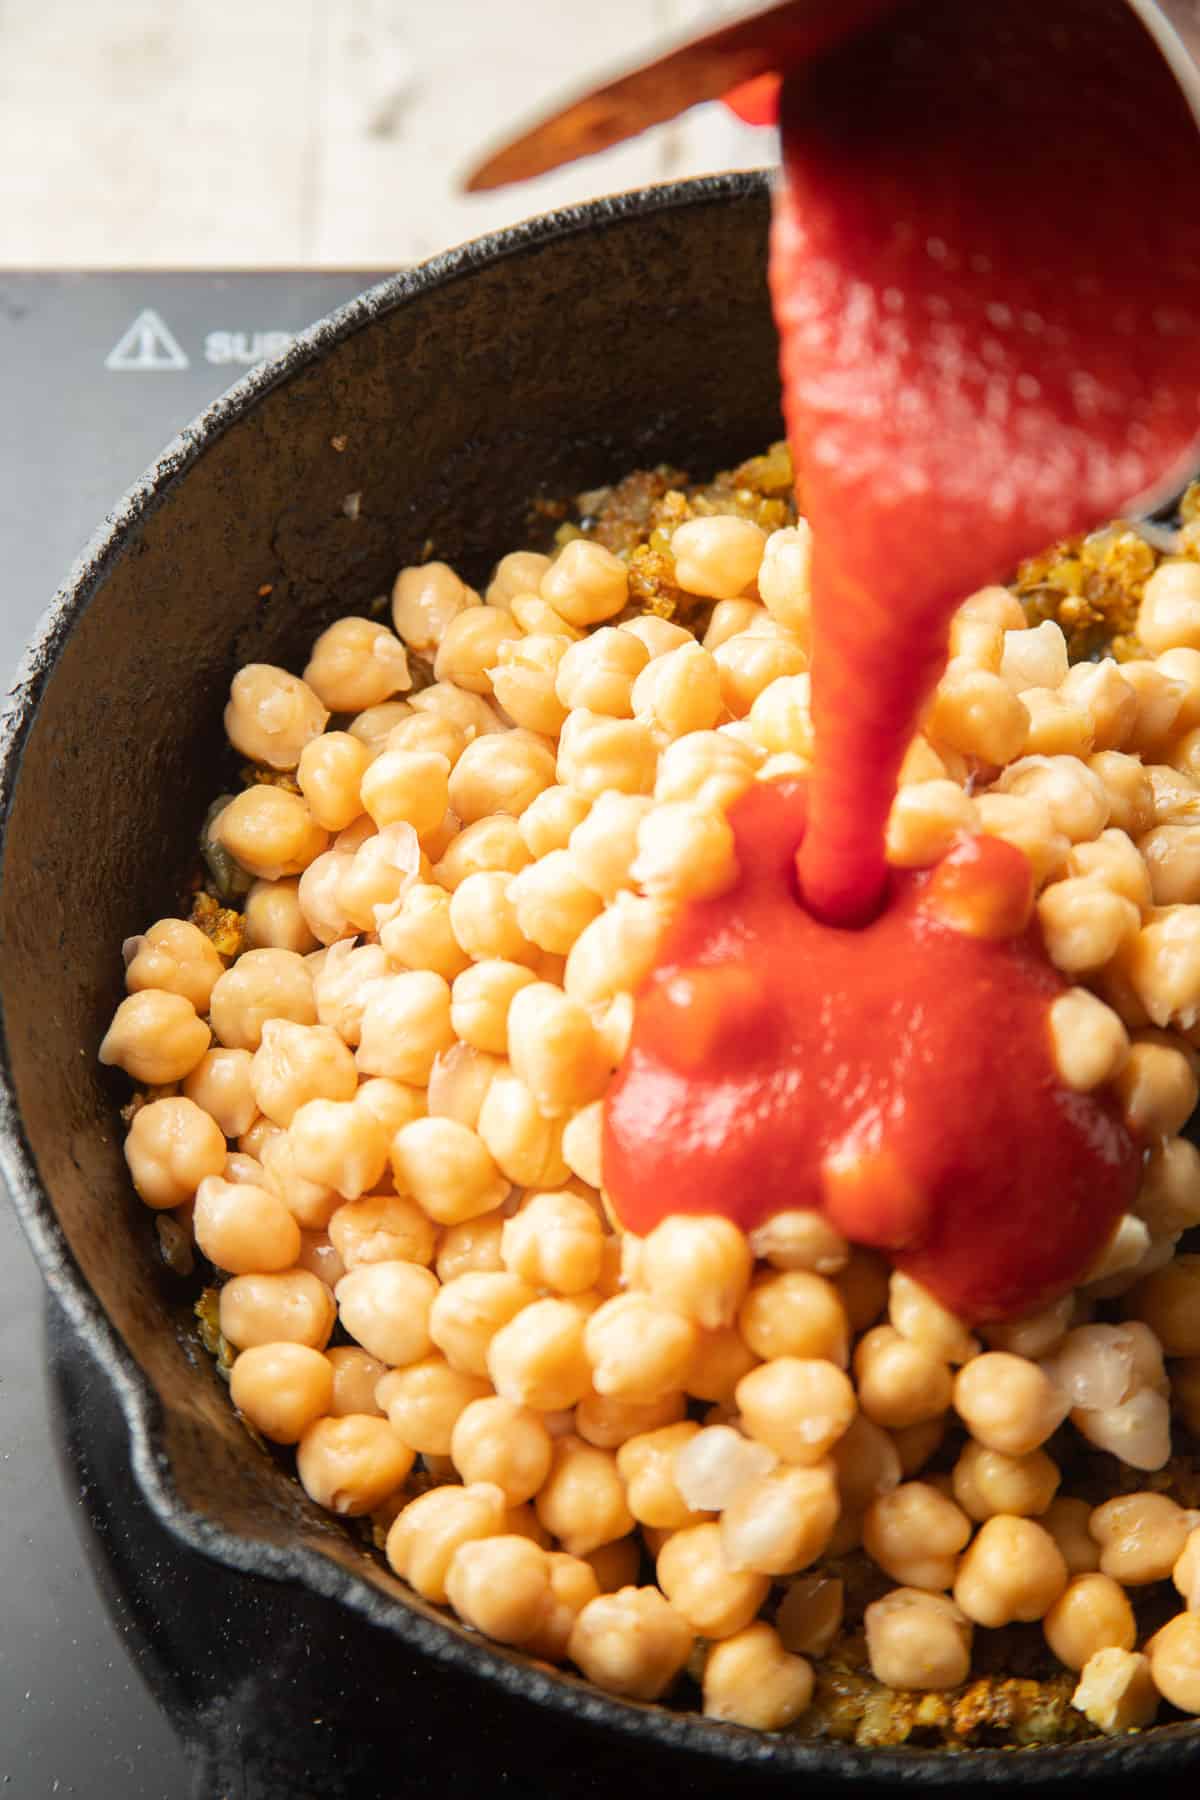 Tomato sauce being poured into a skillet of chickpeas.